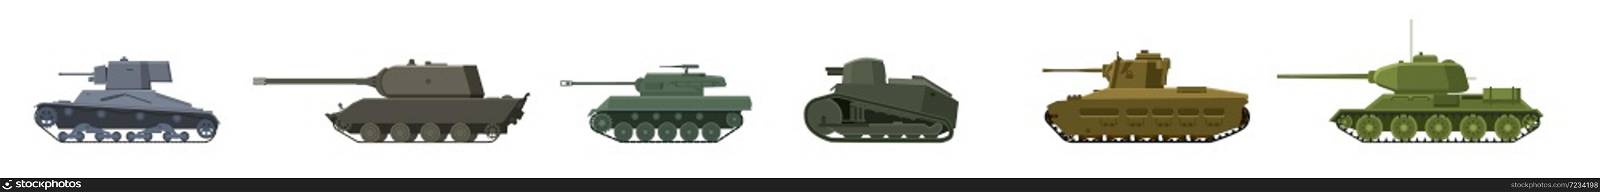 Set Tank American German Britain Soviet French World War 2. Set Tank American German Britain Soviet French World War 2. Military army machine war, weapon, battle symbol silhouette side view icon. Vector illustration isolated